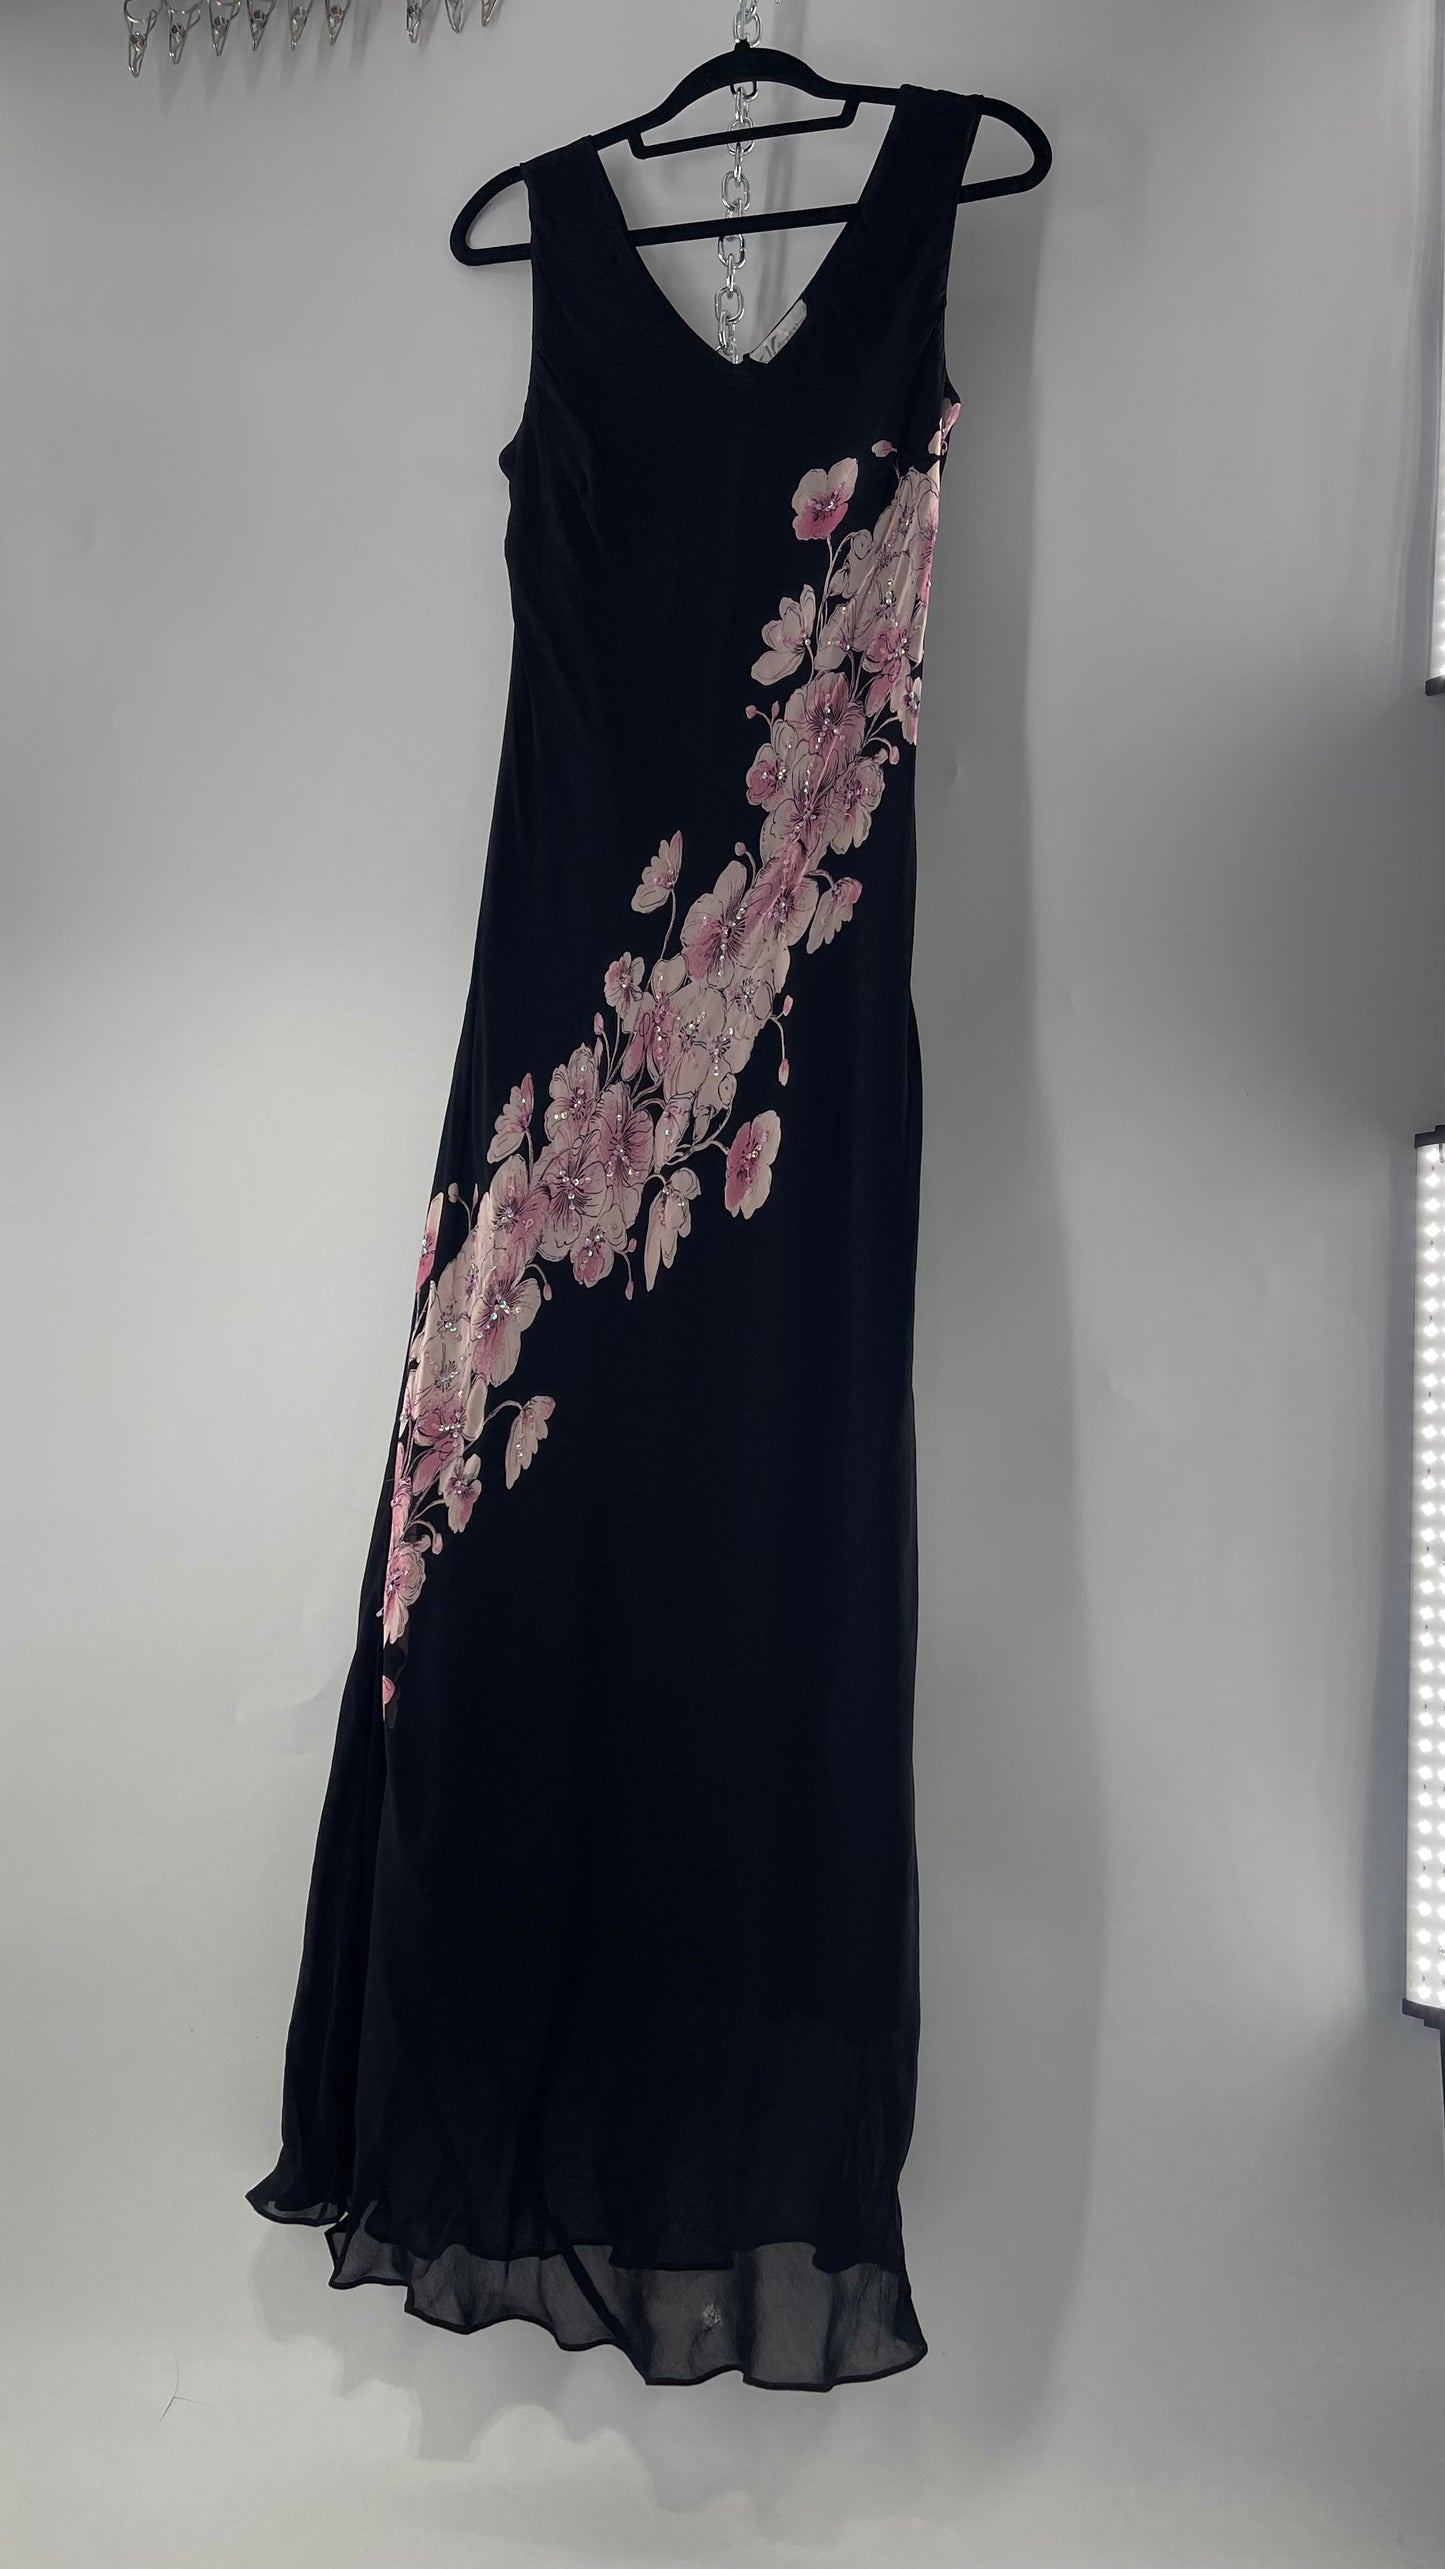 Vintage Dress Barn Black Slinky Maxi Dress with Pink Floral Graphic and Sequins (L)